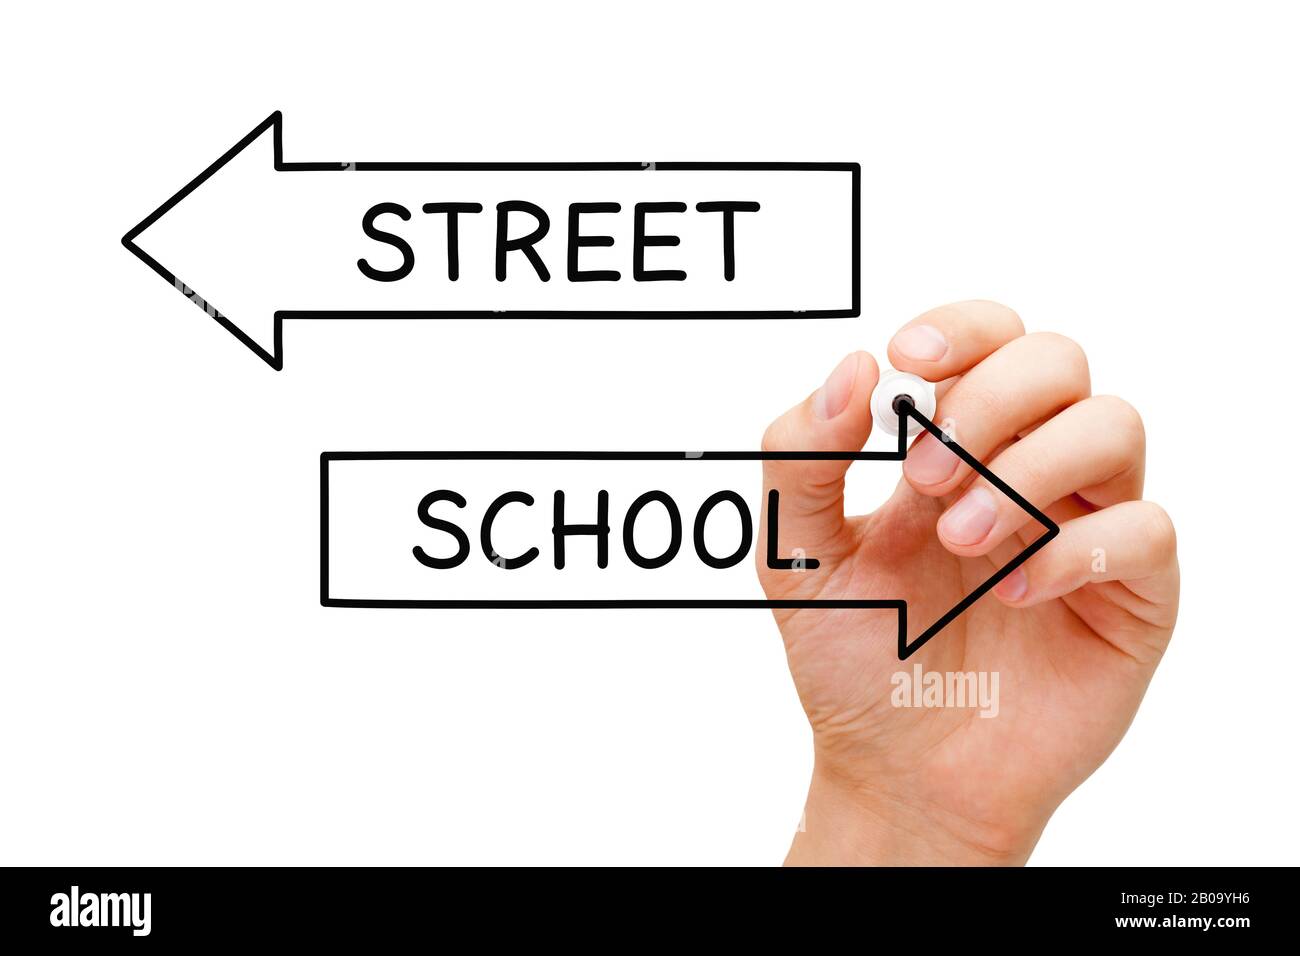 Hand writing School or Street on arrows with marker on transparent wipe board. Out-of-school youth issue or out of school learning concept. Stock Photo